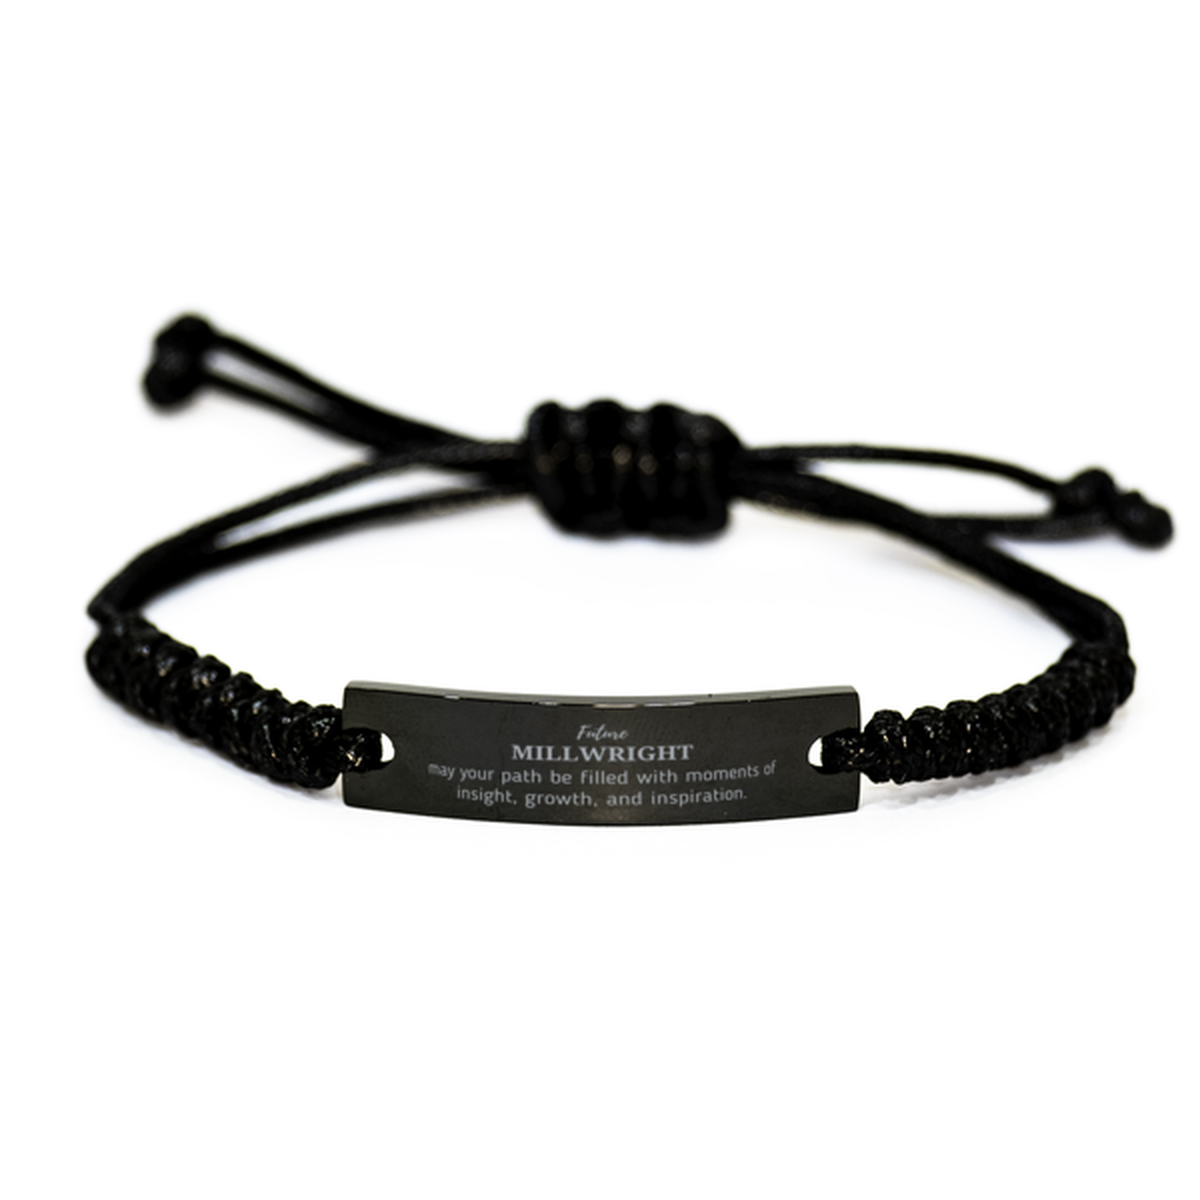 Future Millwright Gifts, May your path be filled with moments of insight, Graduation Gifts for New Millwright, Christmas Unique Black Rope Bracelet For Men, Women, Friends